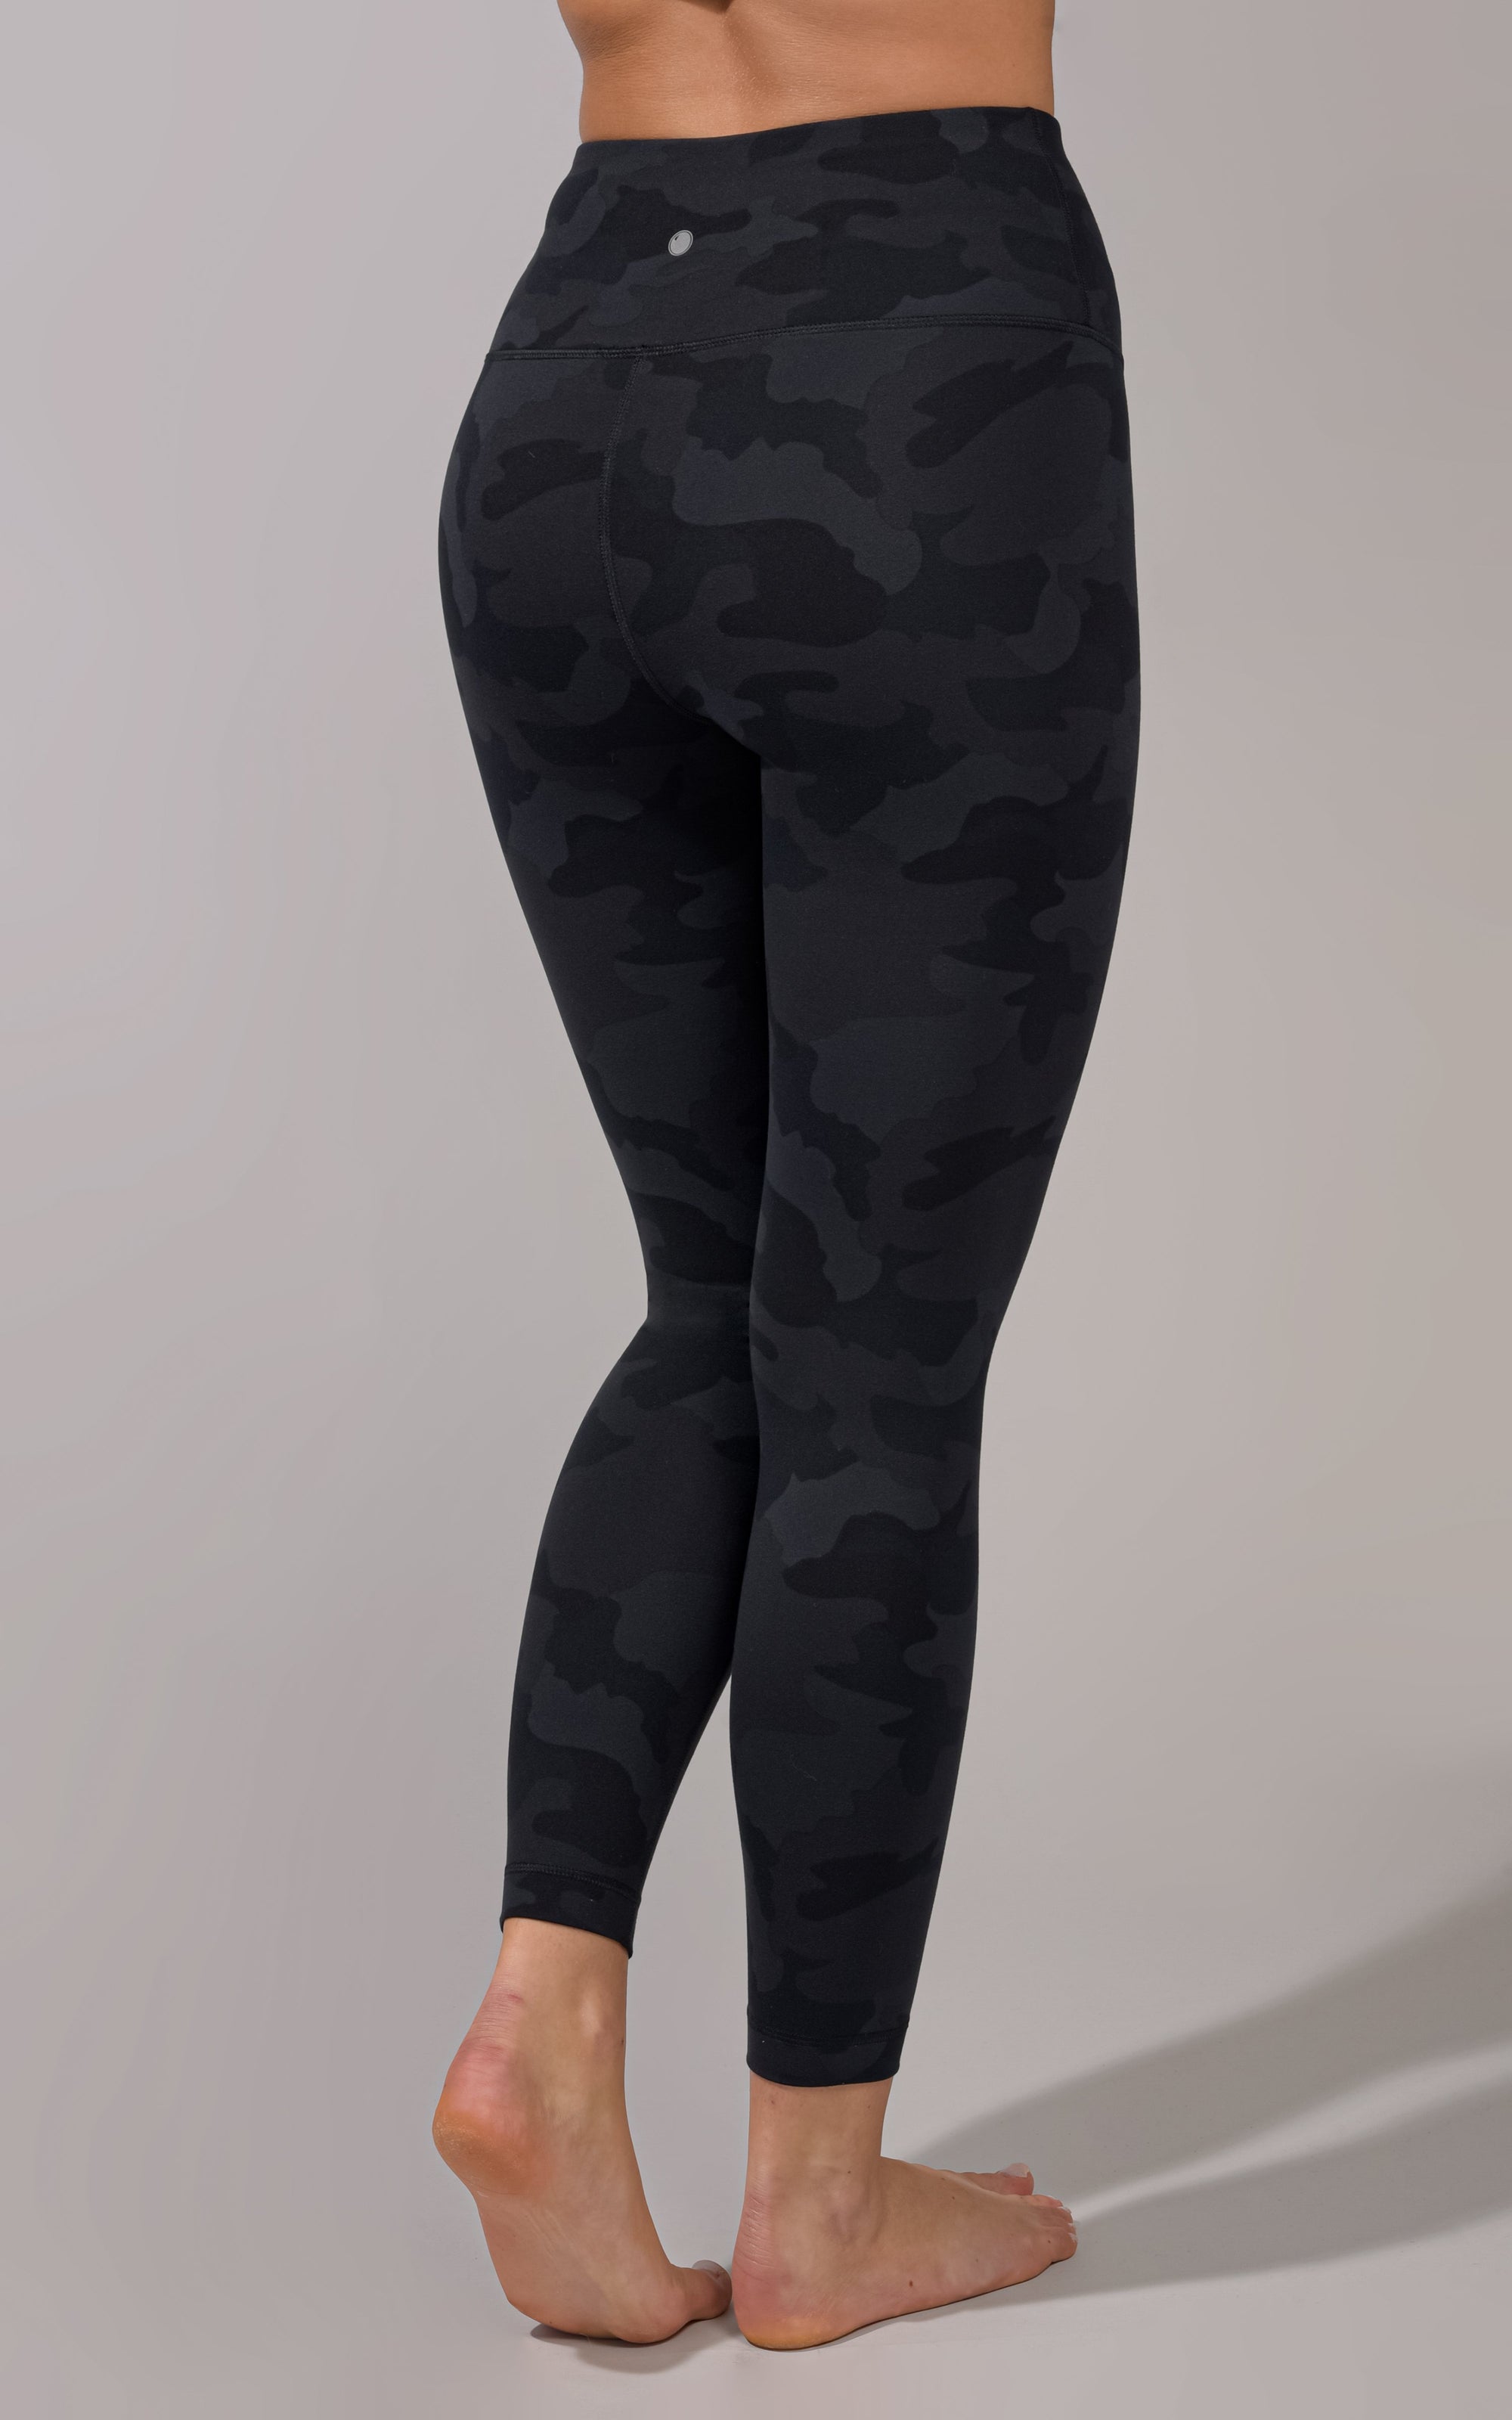 Black and Grey Camo High Waisted Leggings with Pockets – Born Nouli